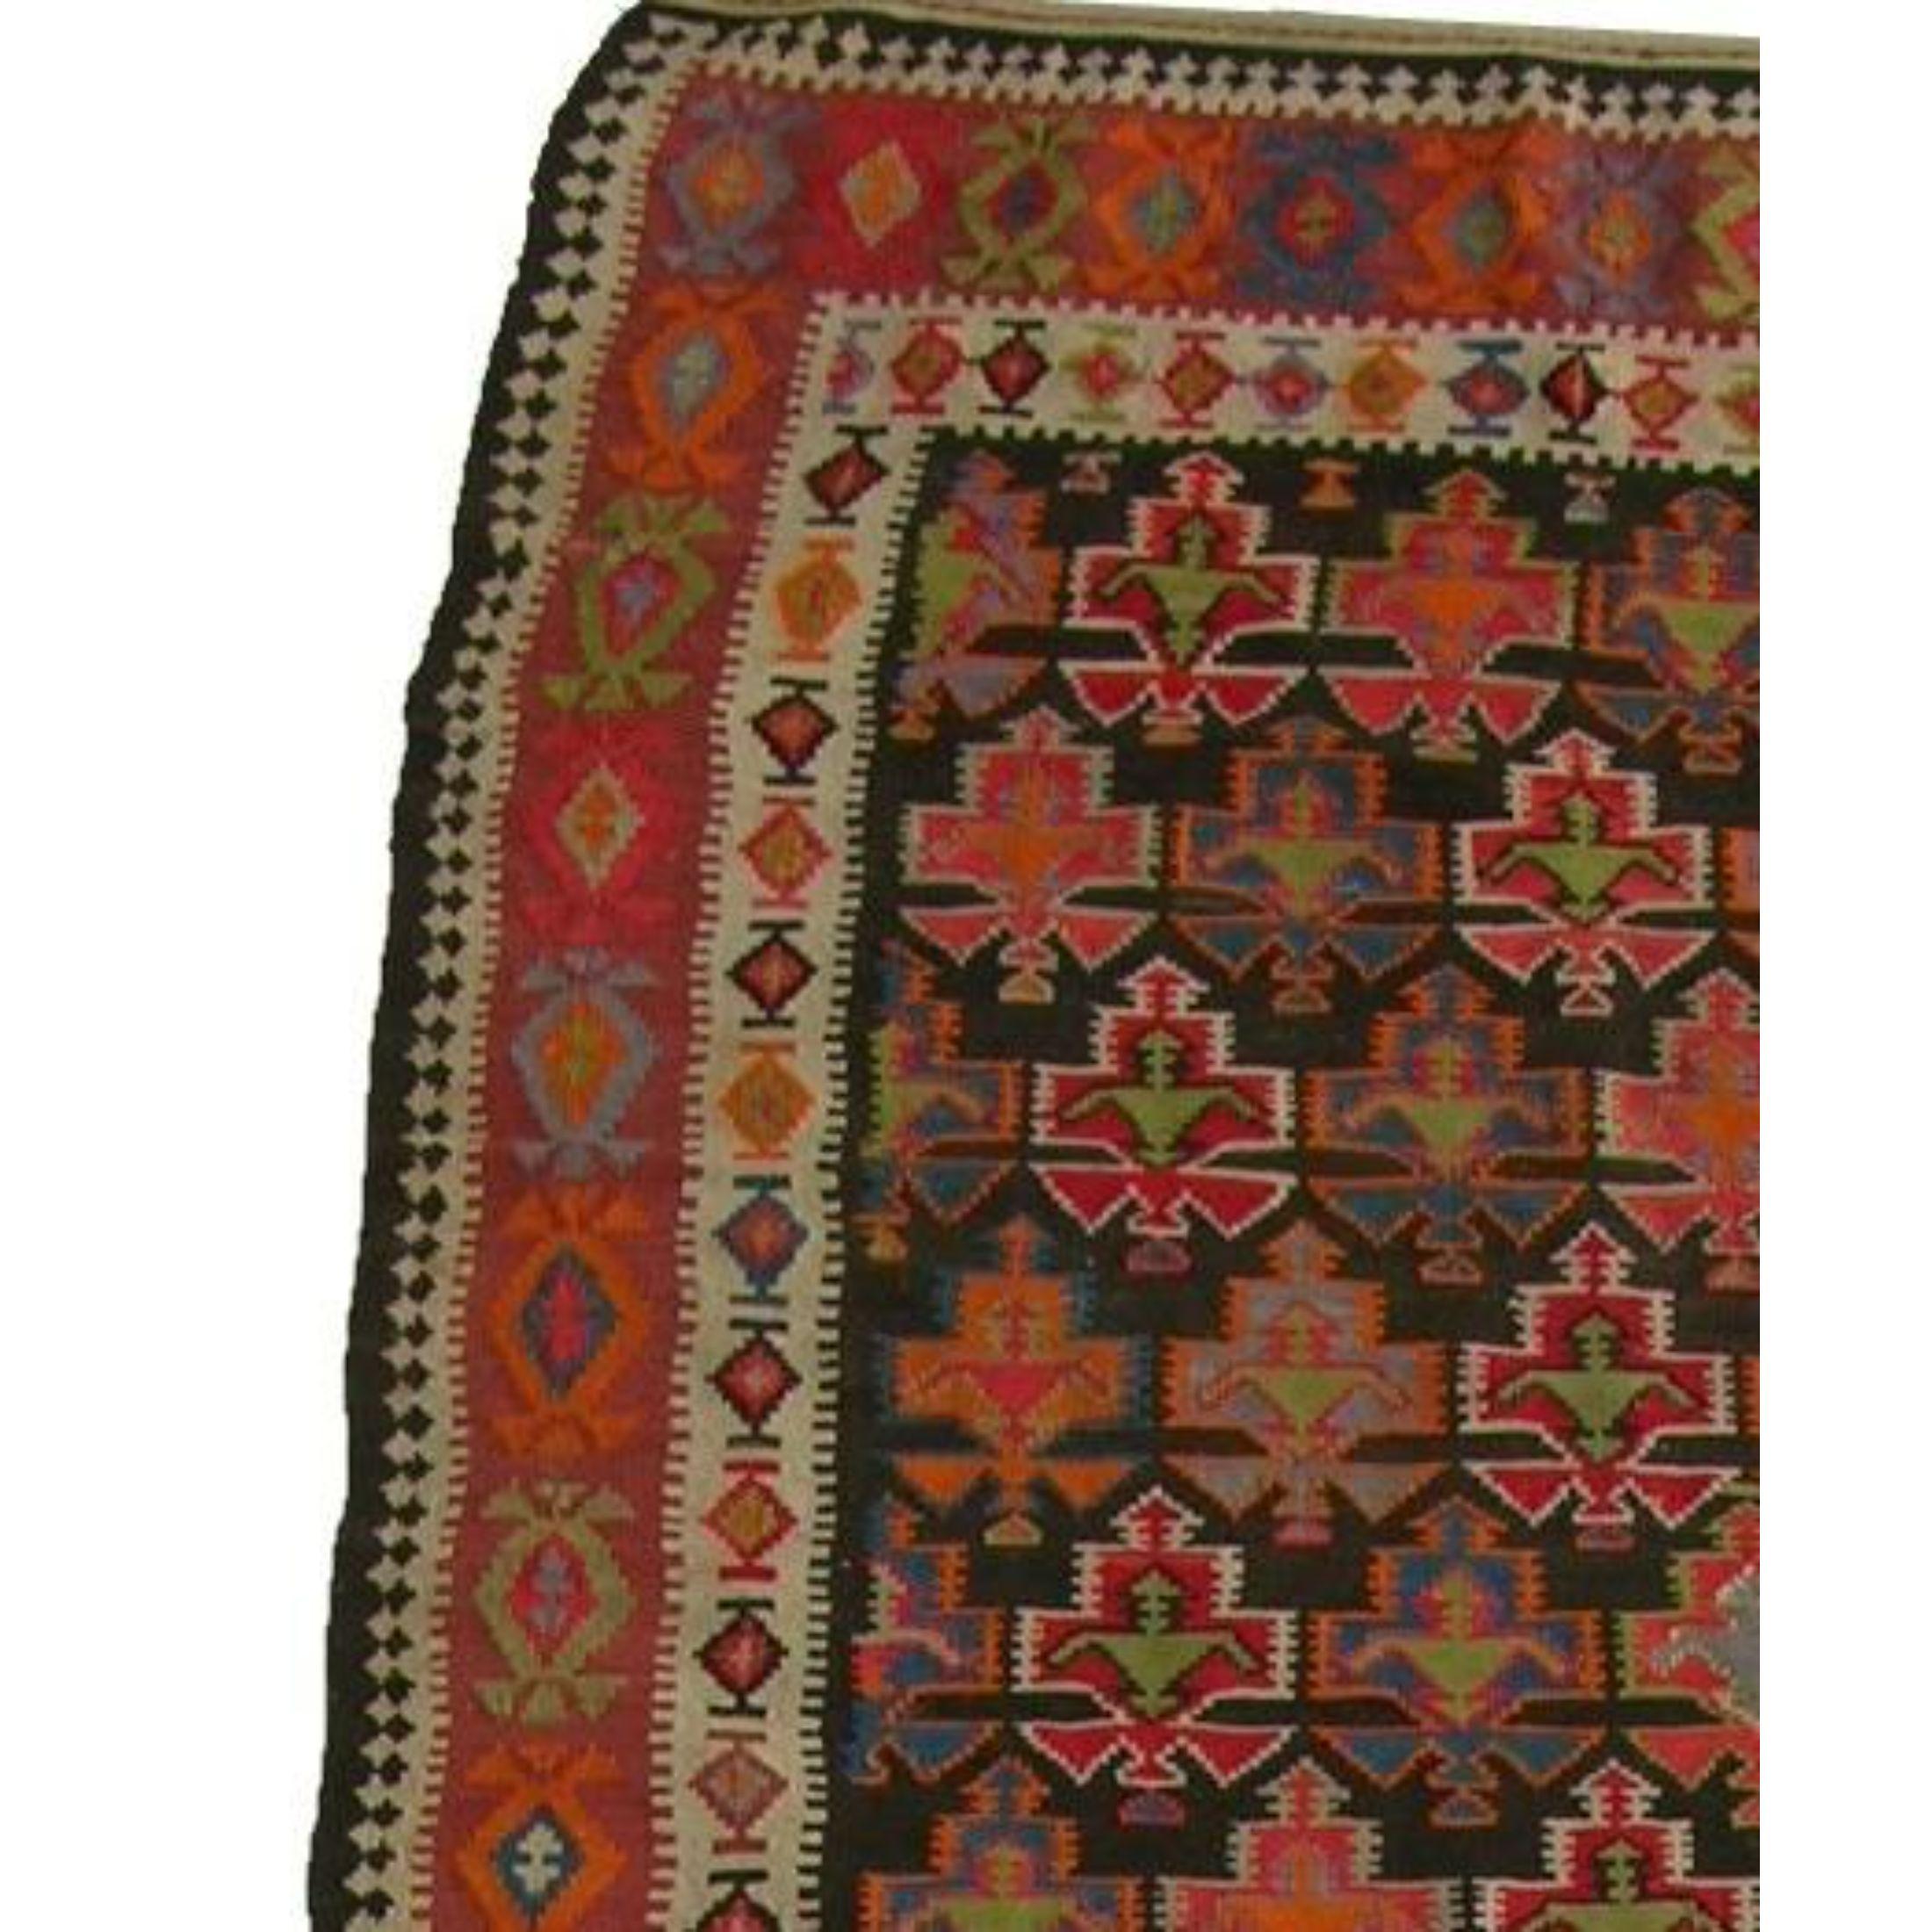 Antique Kilim Runner Rug 14'4'' X 4'10'' In Good Condition For Sale In Los Angeles, US